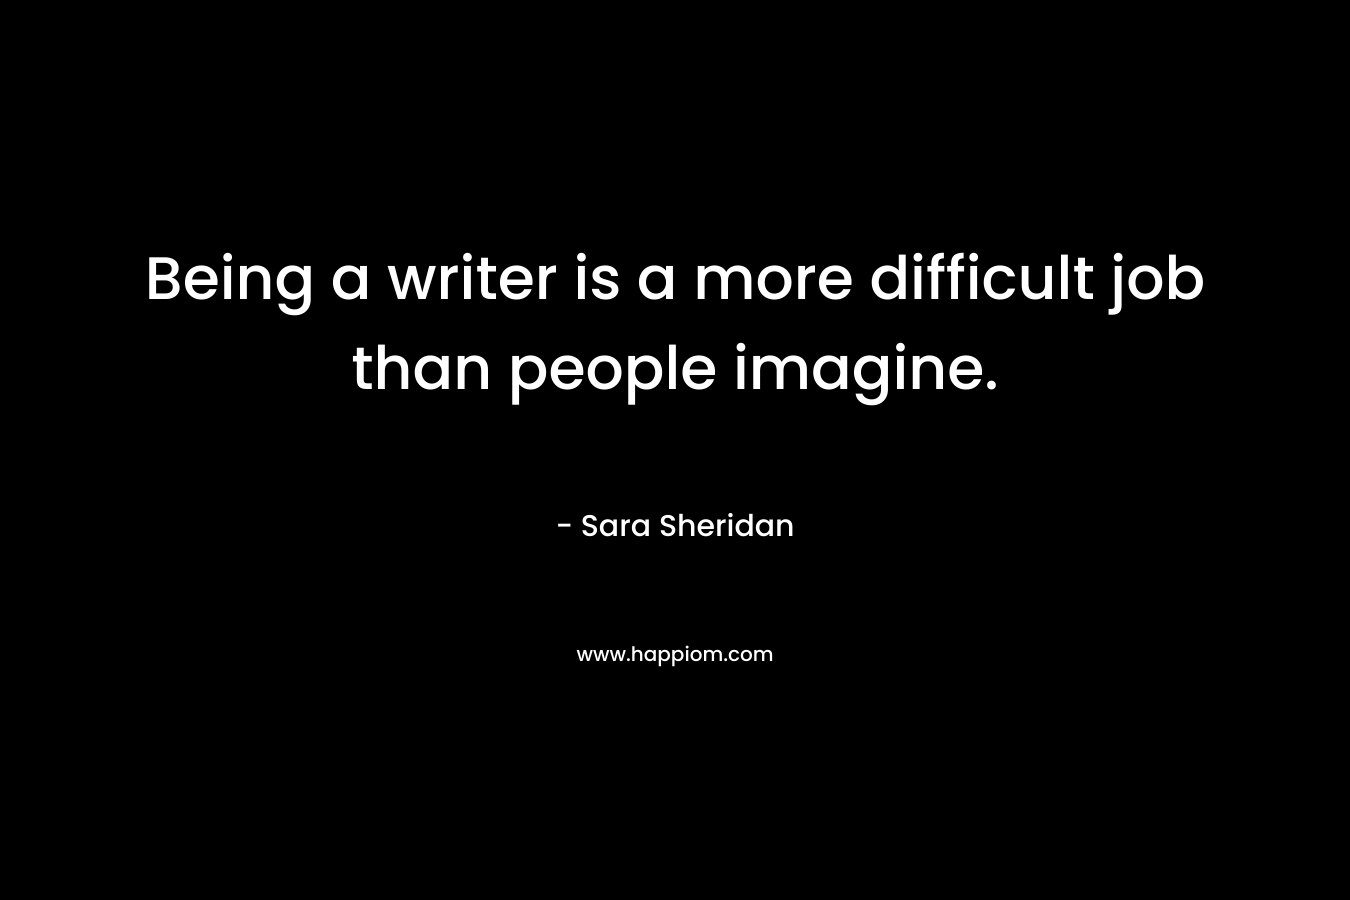 Being a writer is a more difficult job than people imagine. – Sara Sheridan